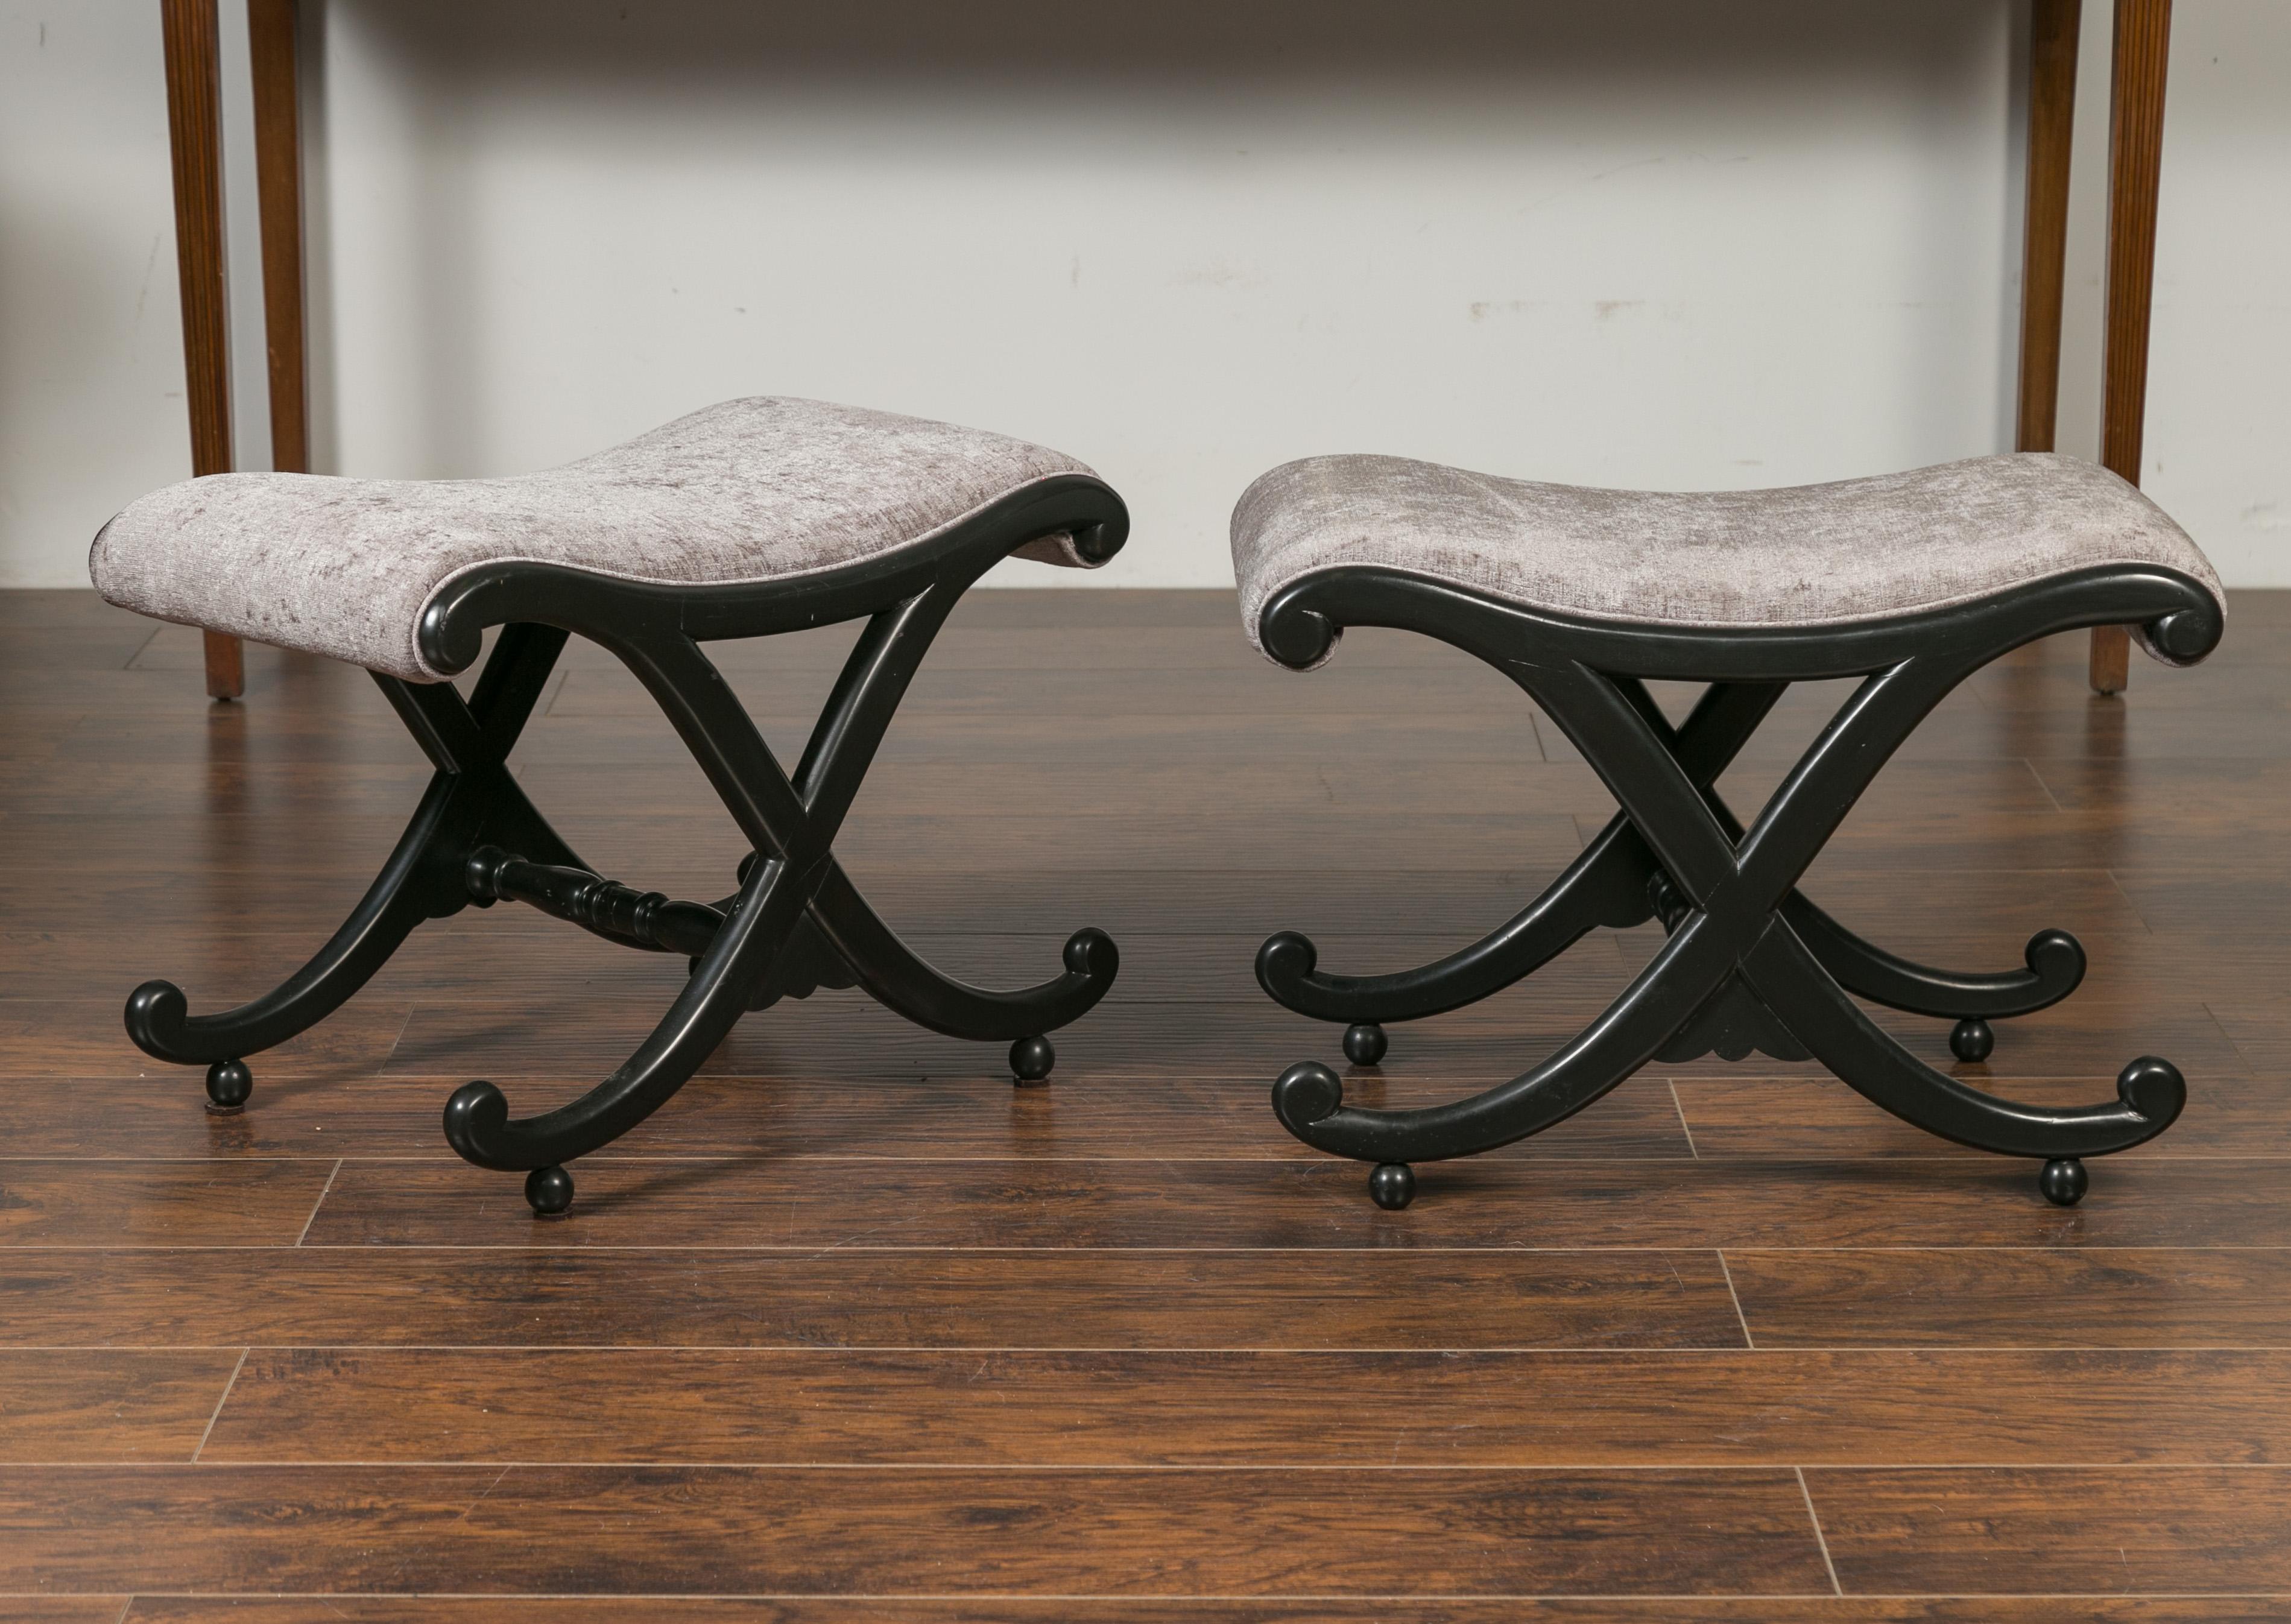 Carved Pair of Italian Midcentury Ebonized Wood X-Form Stools with Grey Upholstery